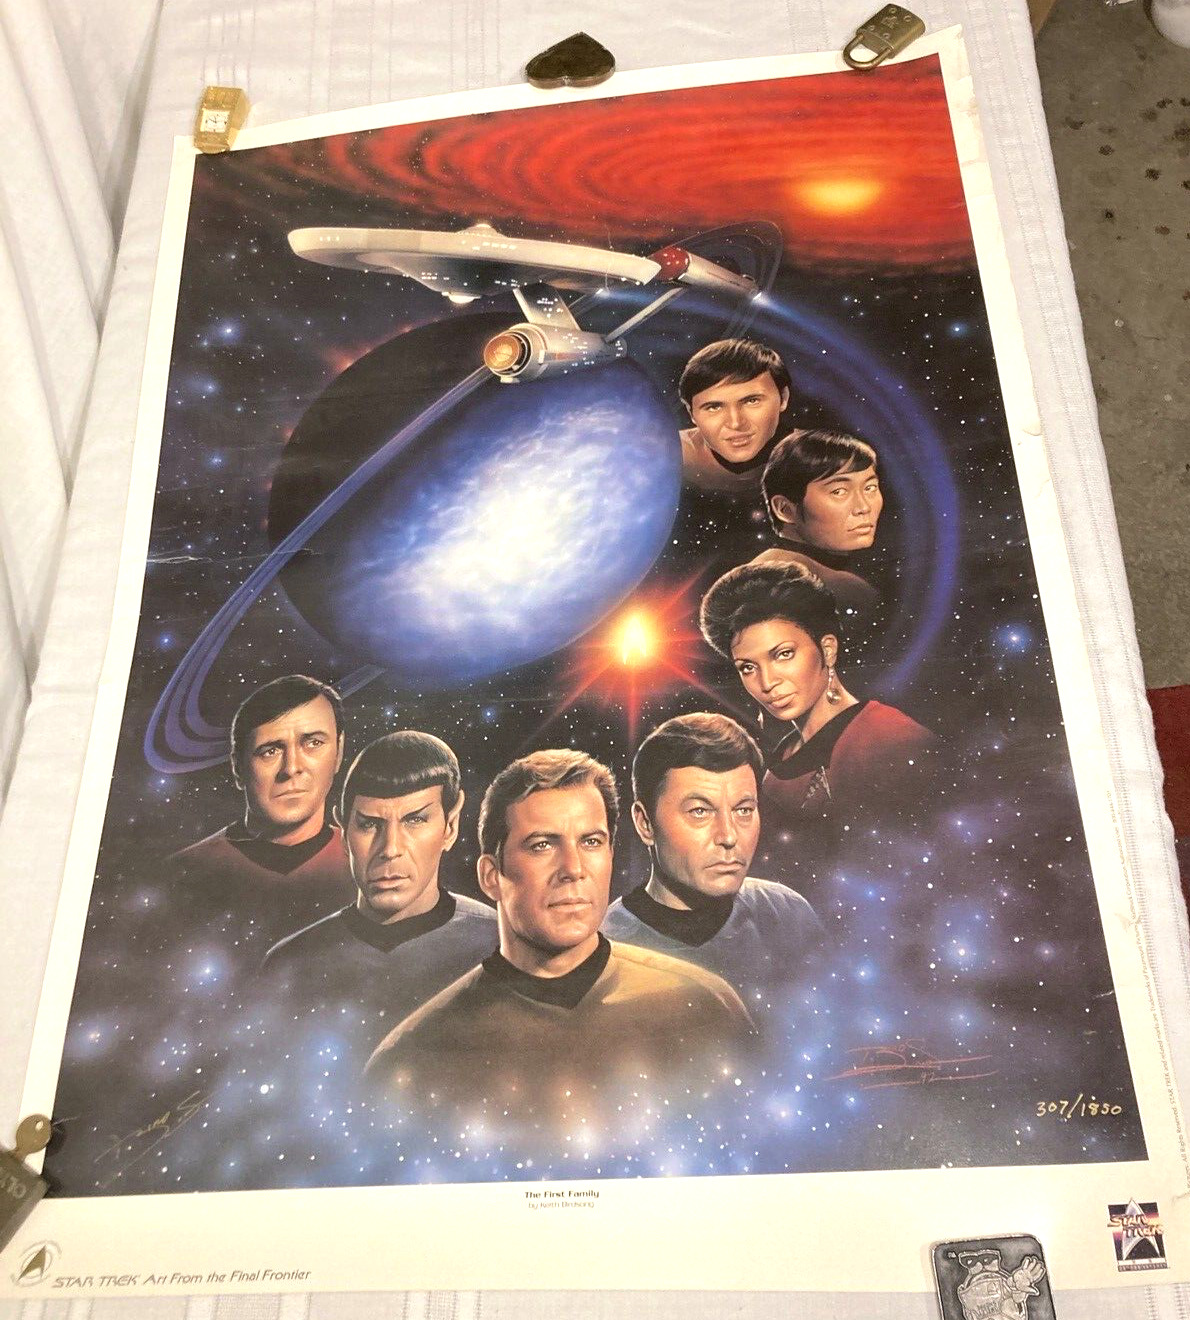 Star Trek Lithograph Print by Keith Birdsong Limited 307/1850 Signed 